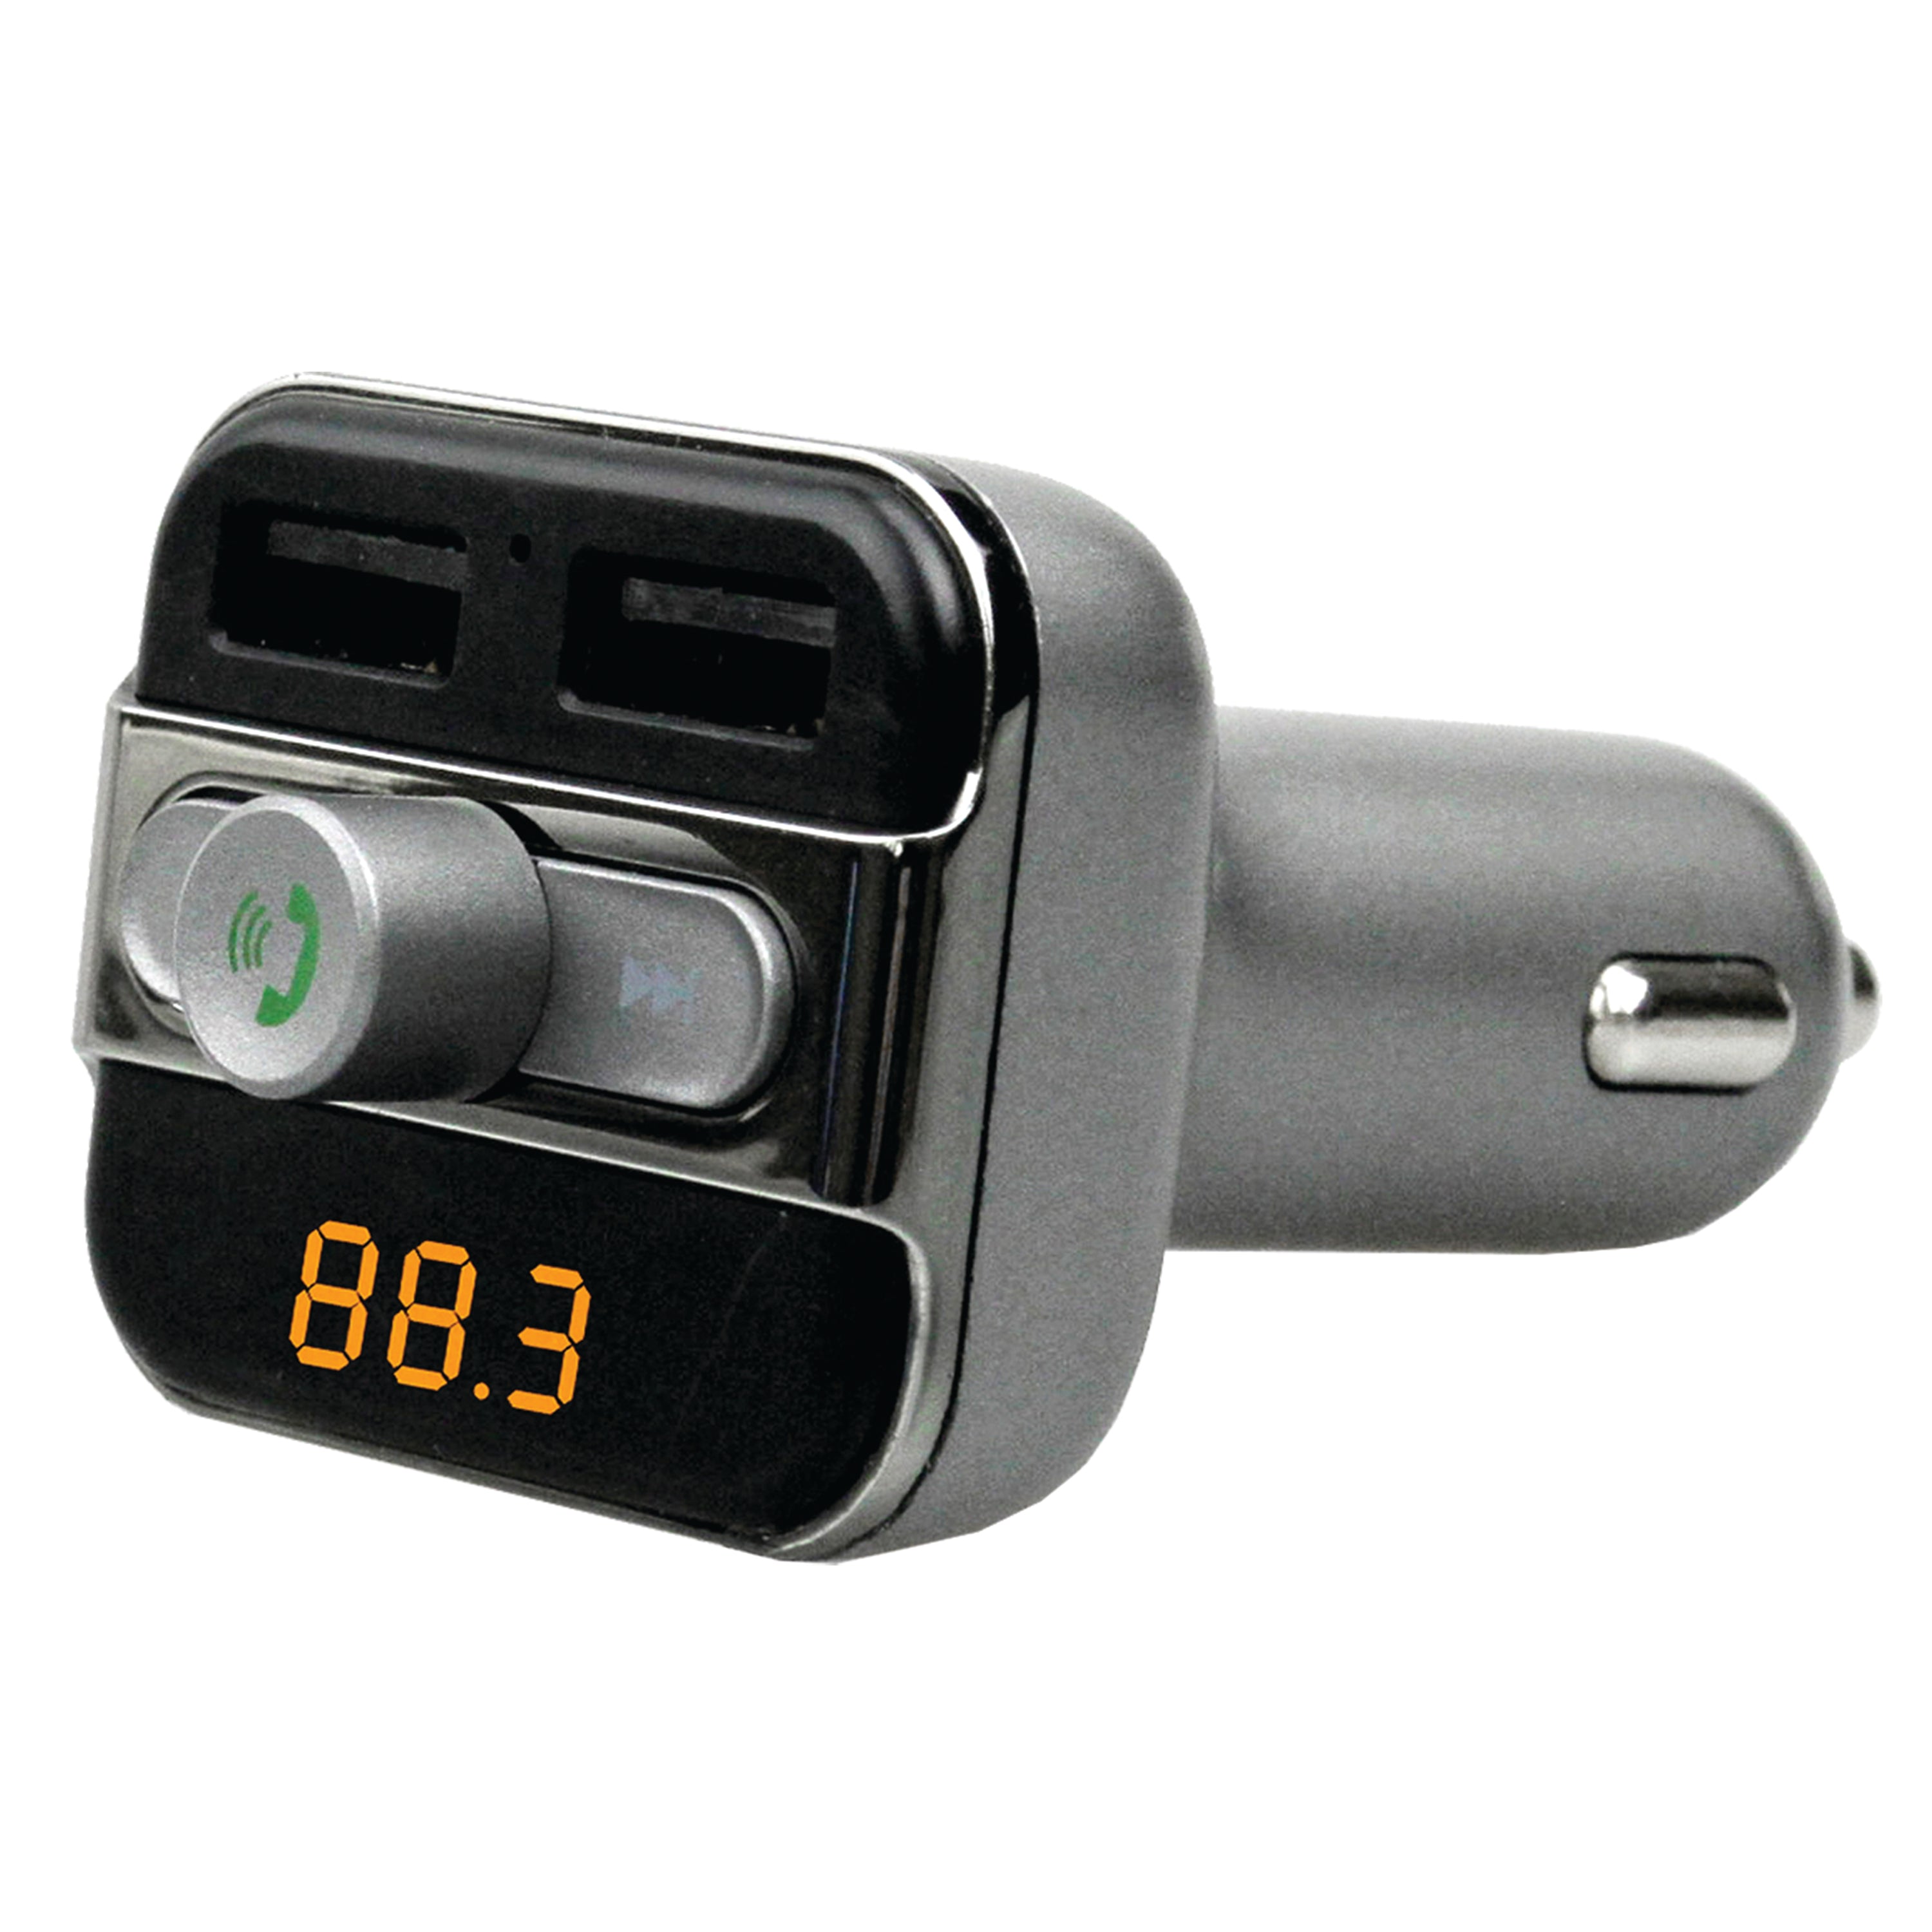 FM Transmitter with charger 